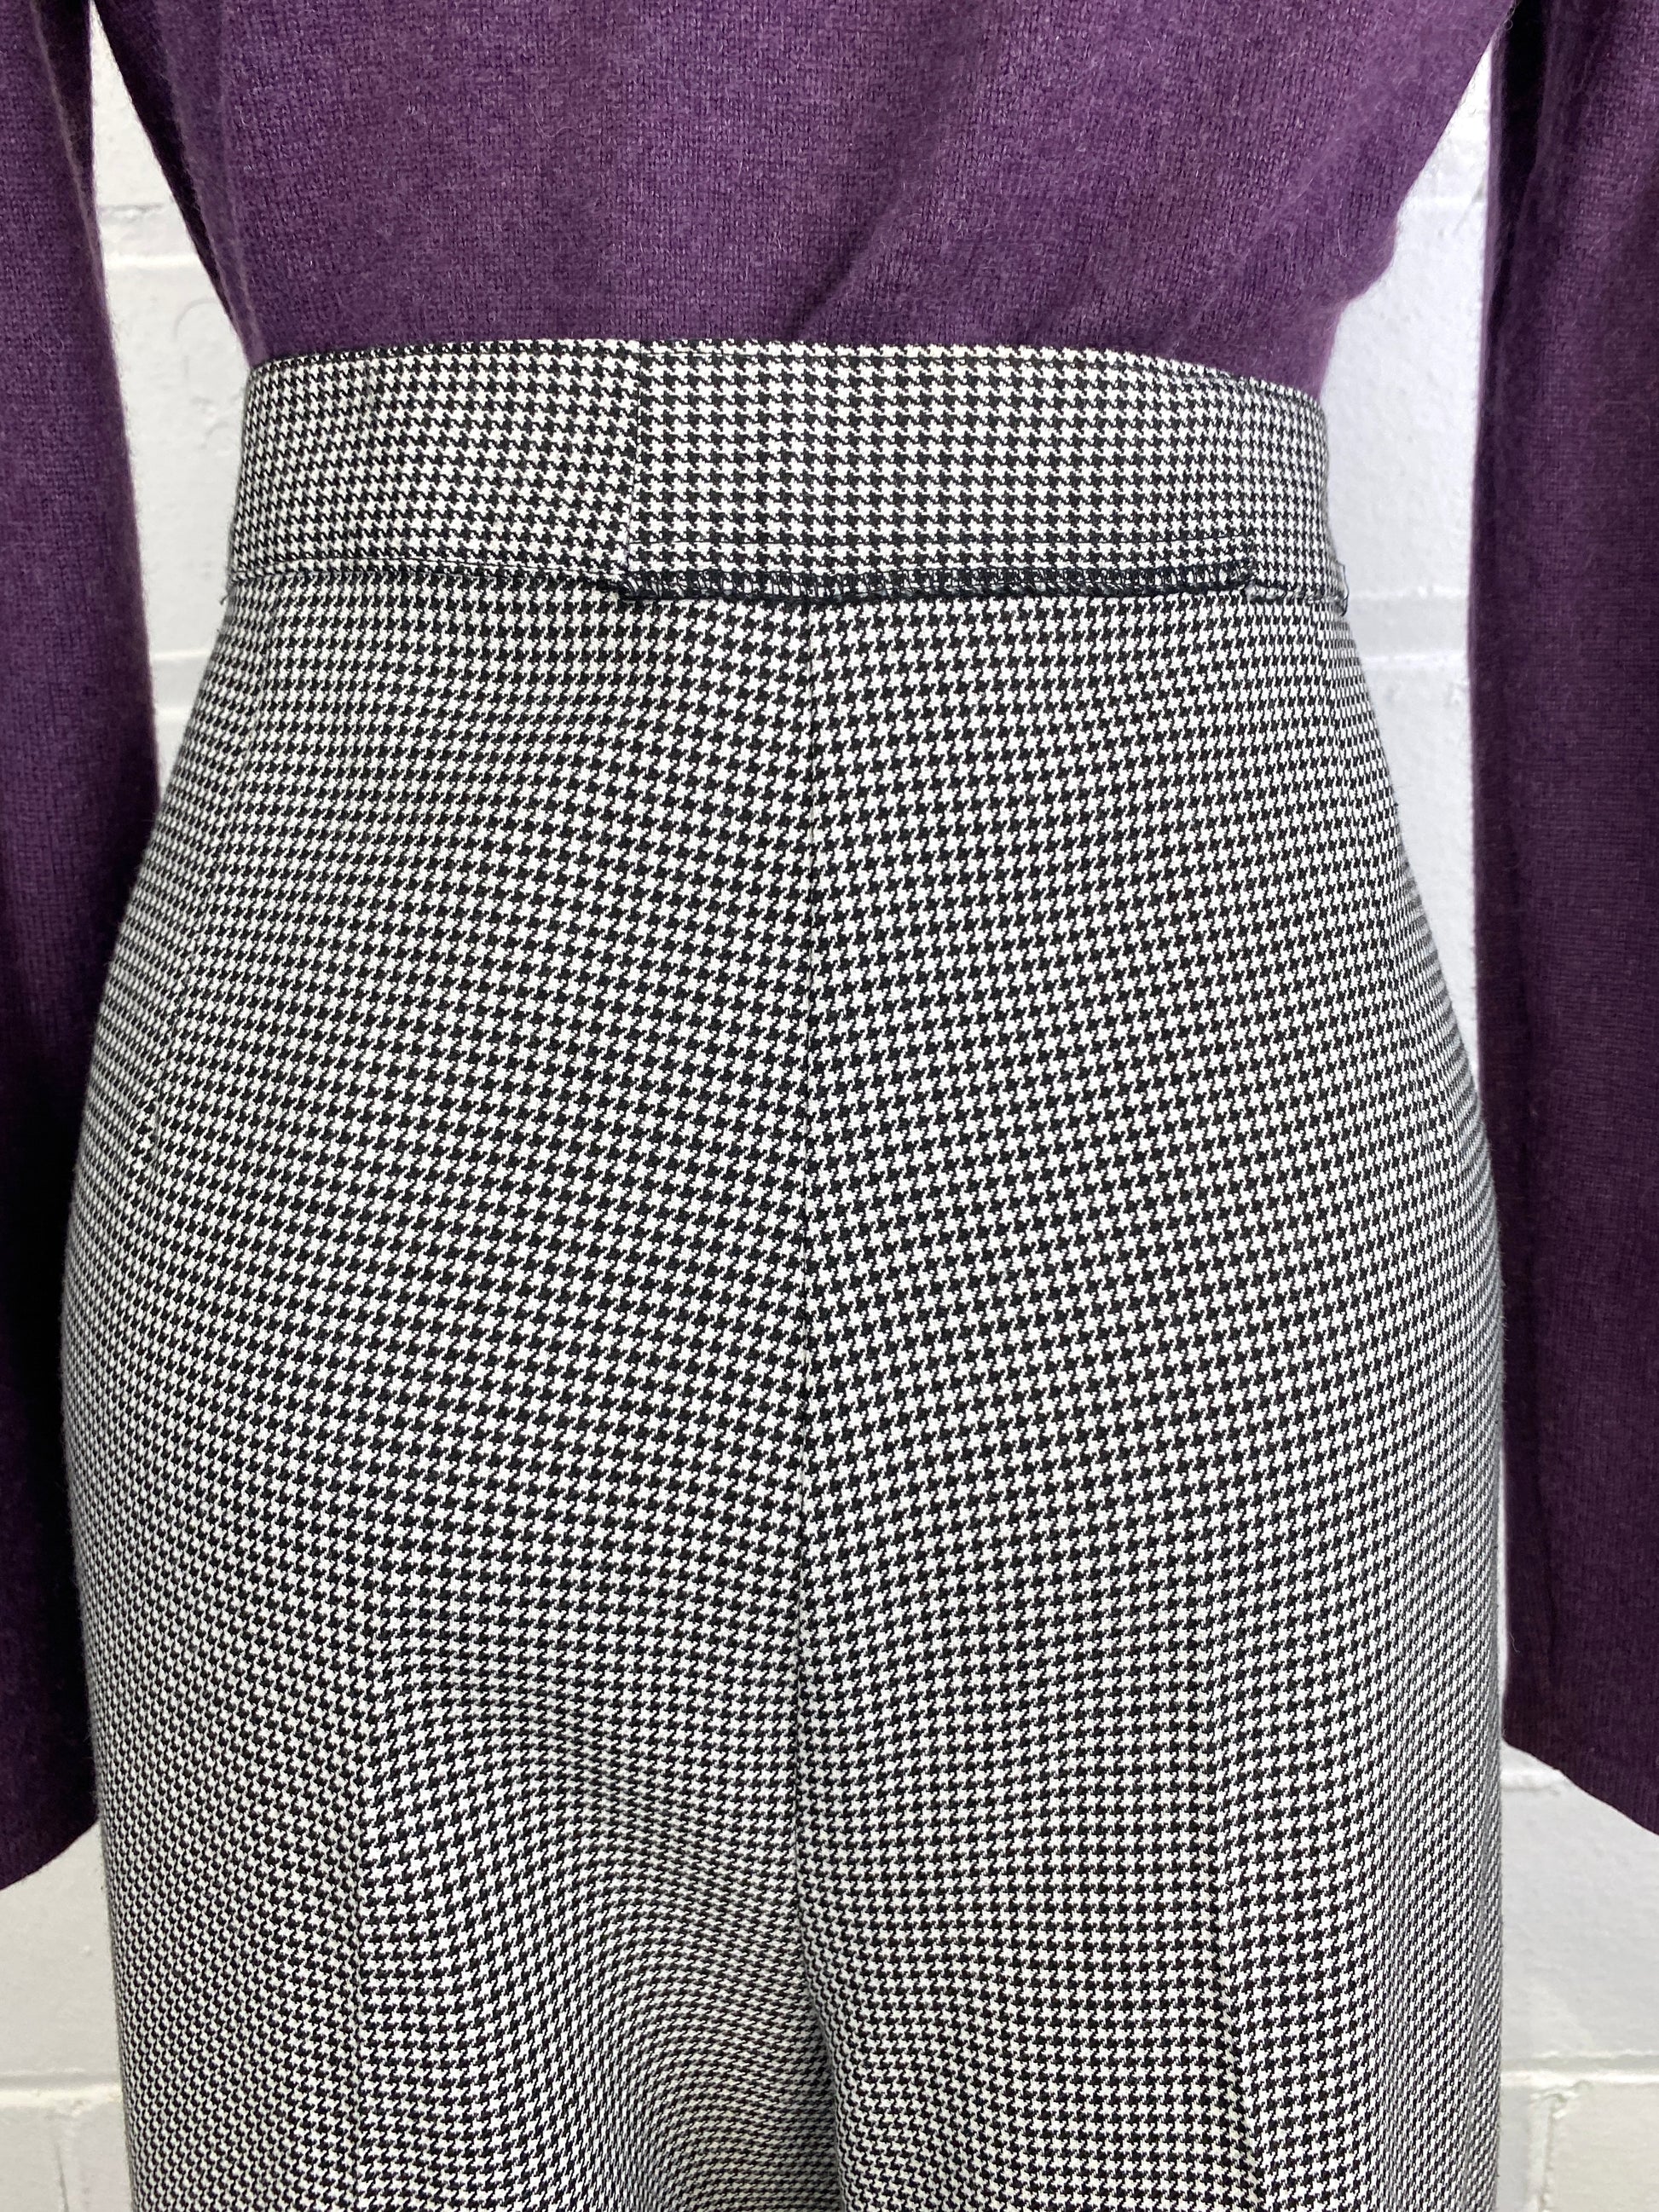 Vintage 1980s Black & White Houndstooth Check Trousers, W36"